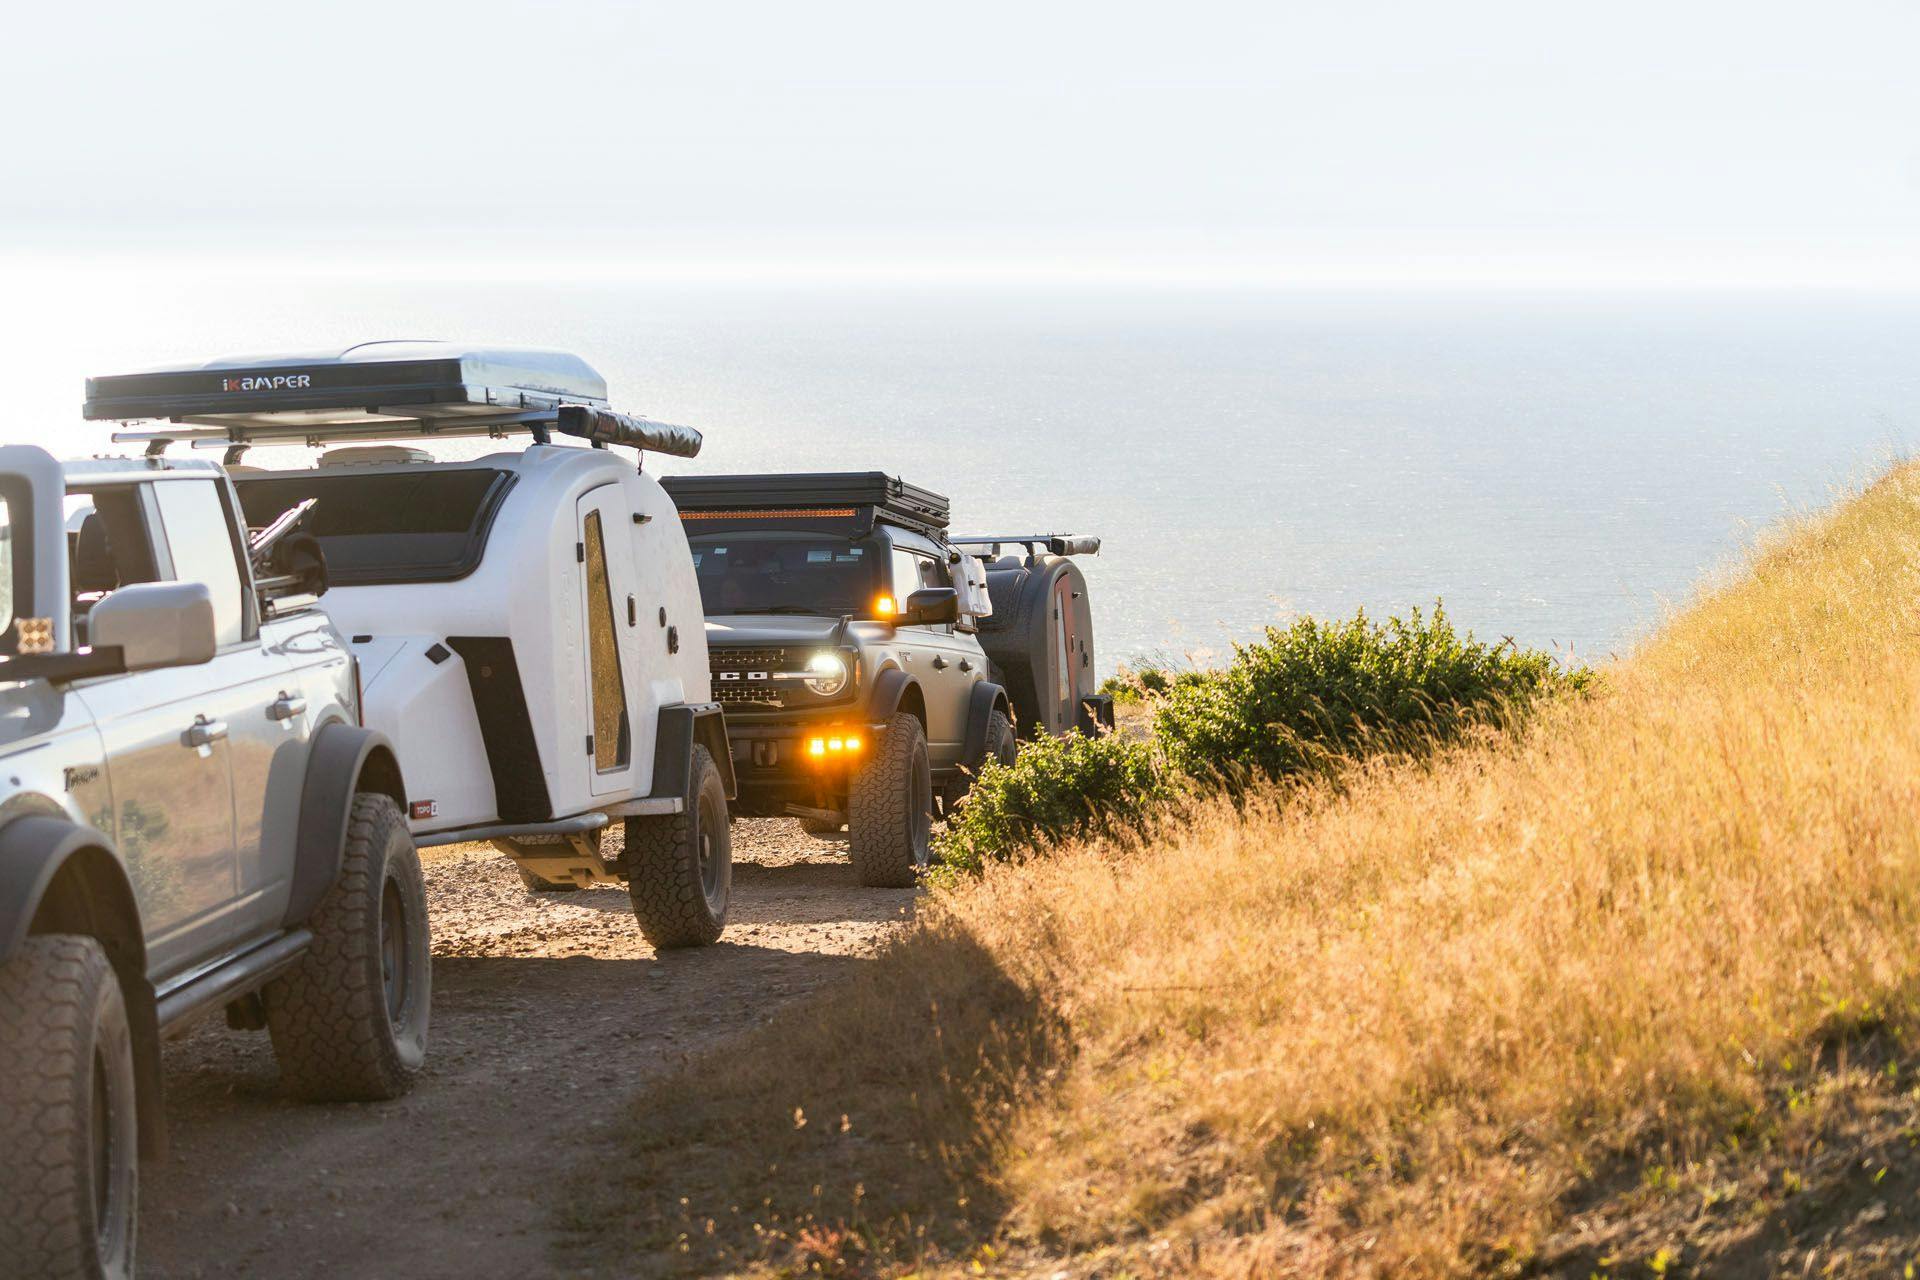 TOPO2s being towed by multiple Bronco vehicles